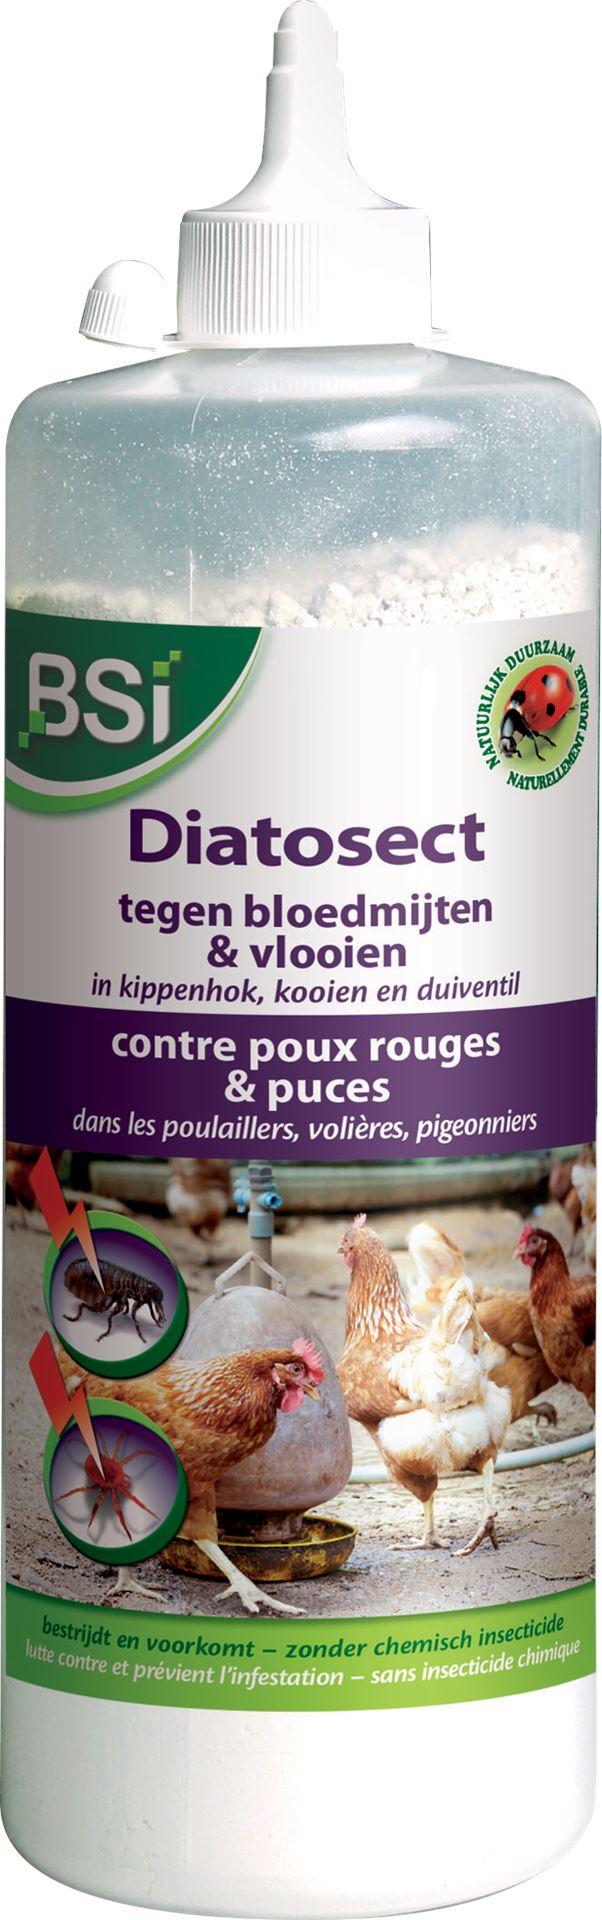 BSI Diatosect Poultry - Ecological solution against blood lice based on 100 % diatomaceous earth - 200 g